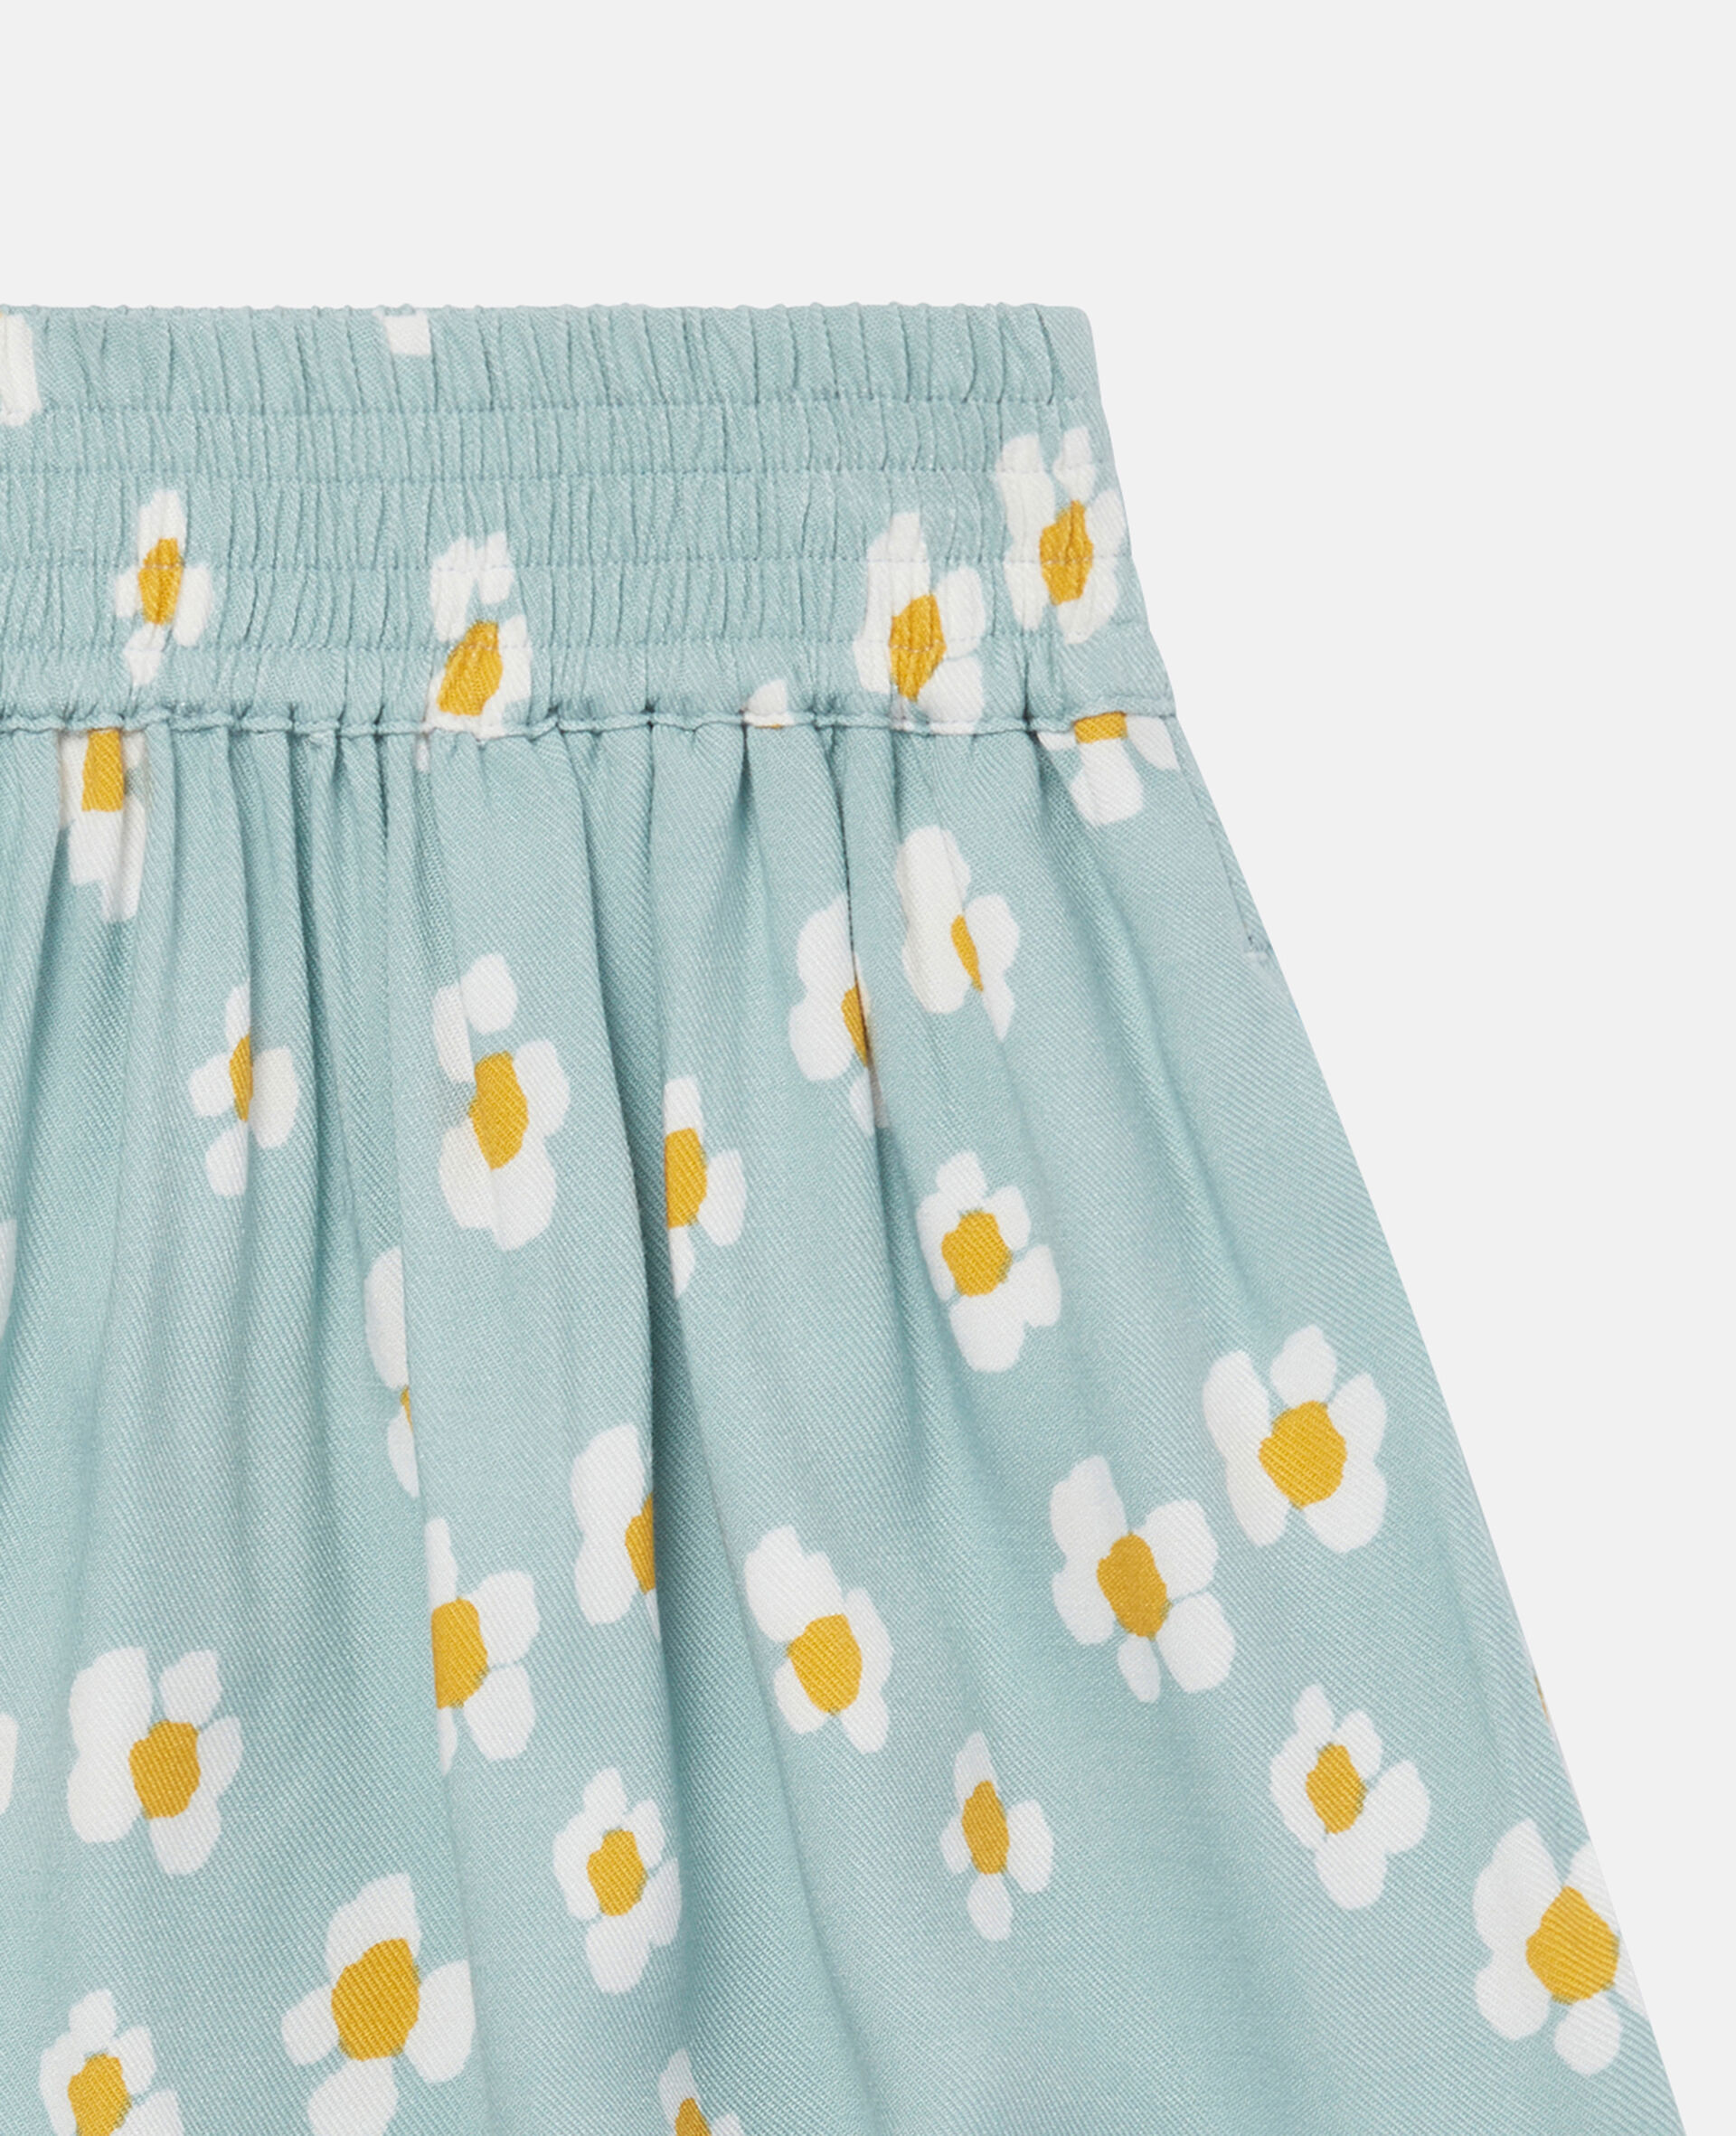 Daisy Print Twill Skirt-Blue-large image number 3